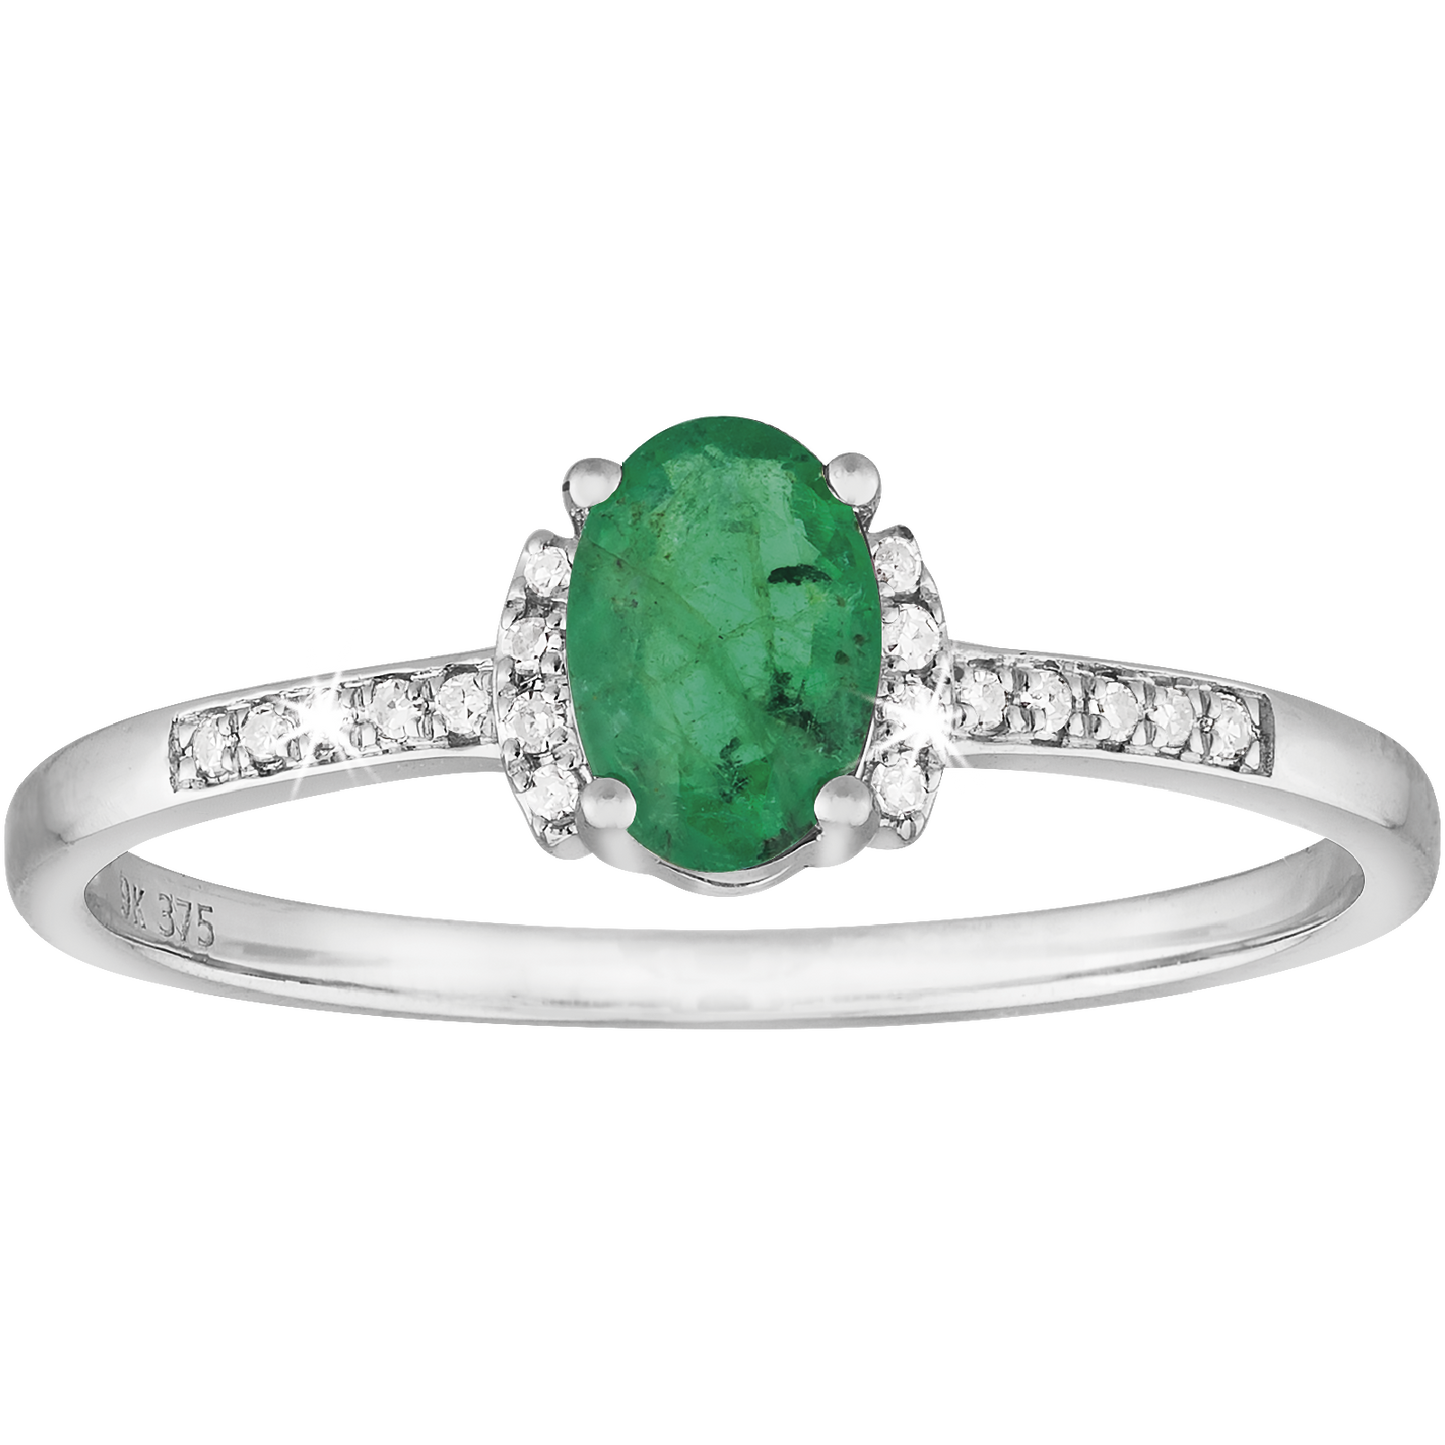 0.05ct Diamond and Emerald Grip Ring in 9ct White Gold